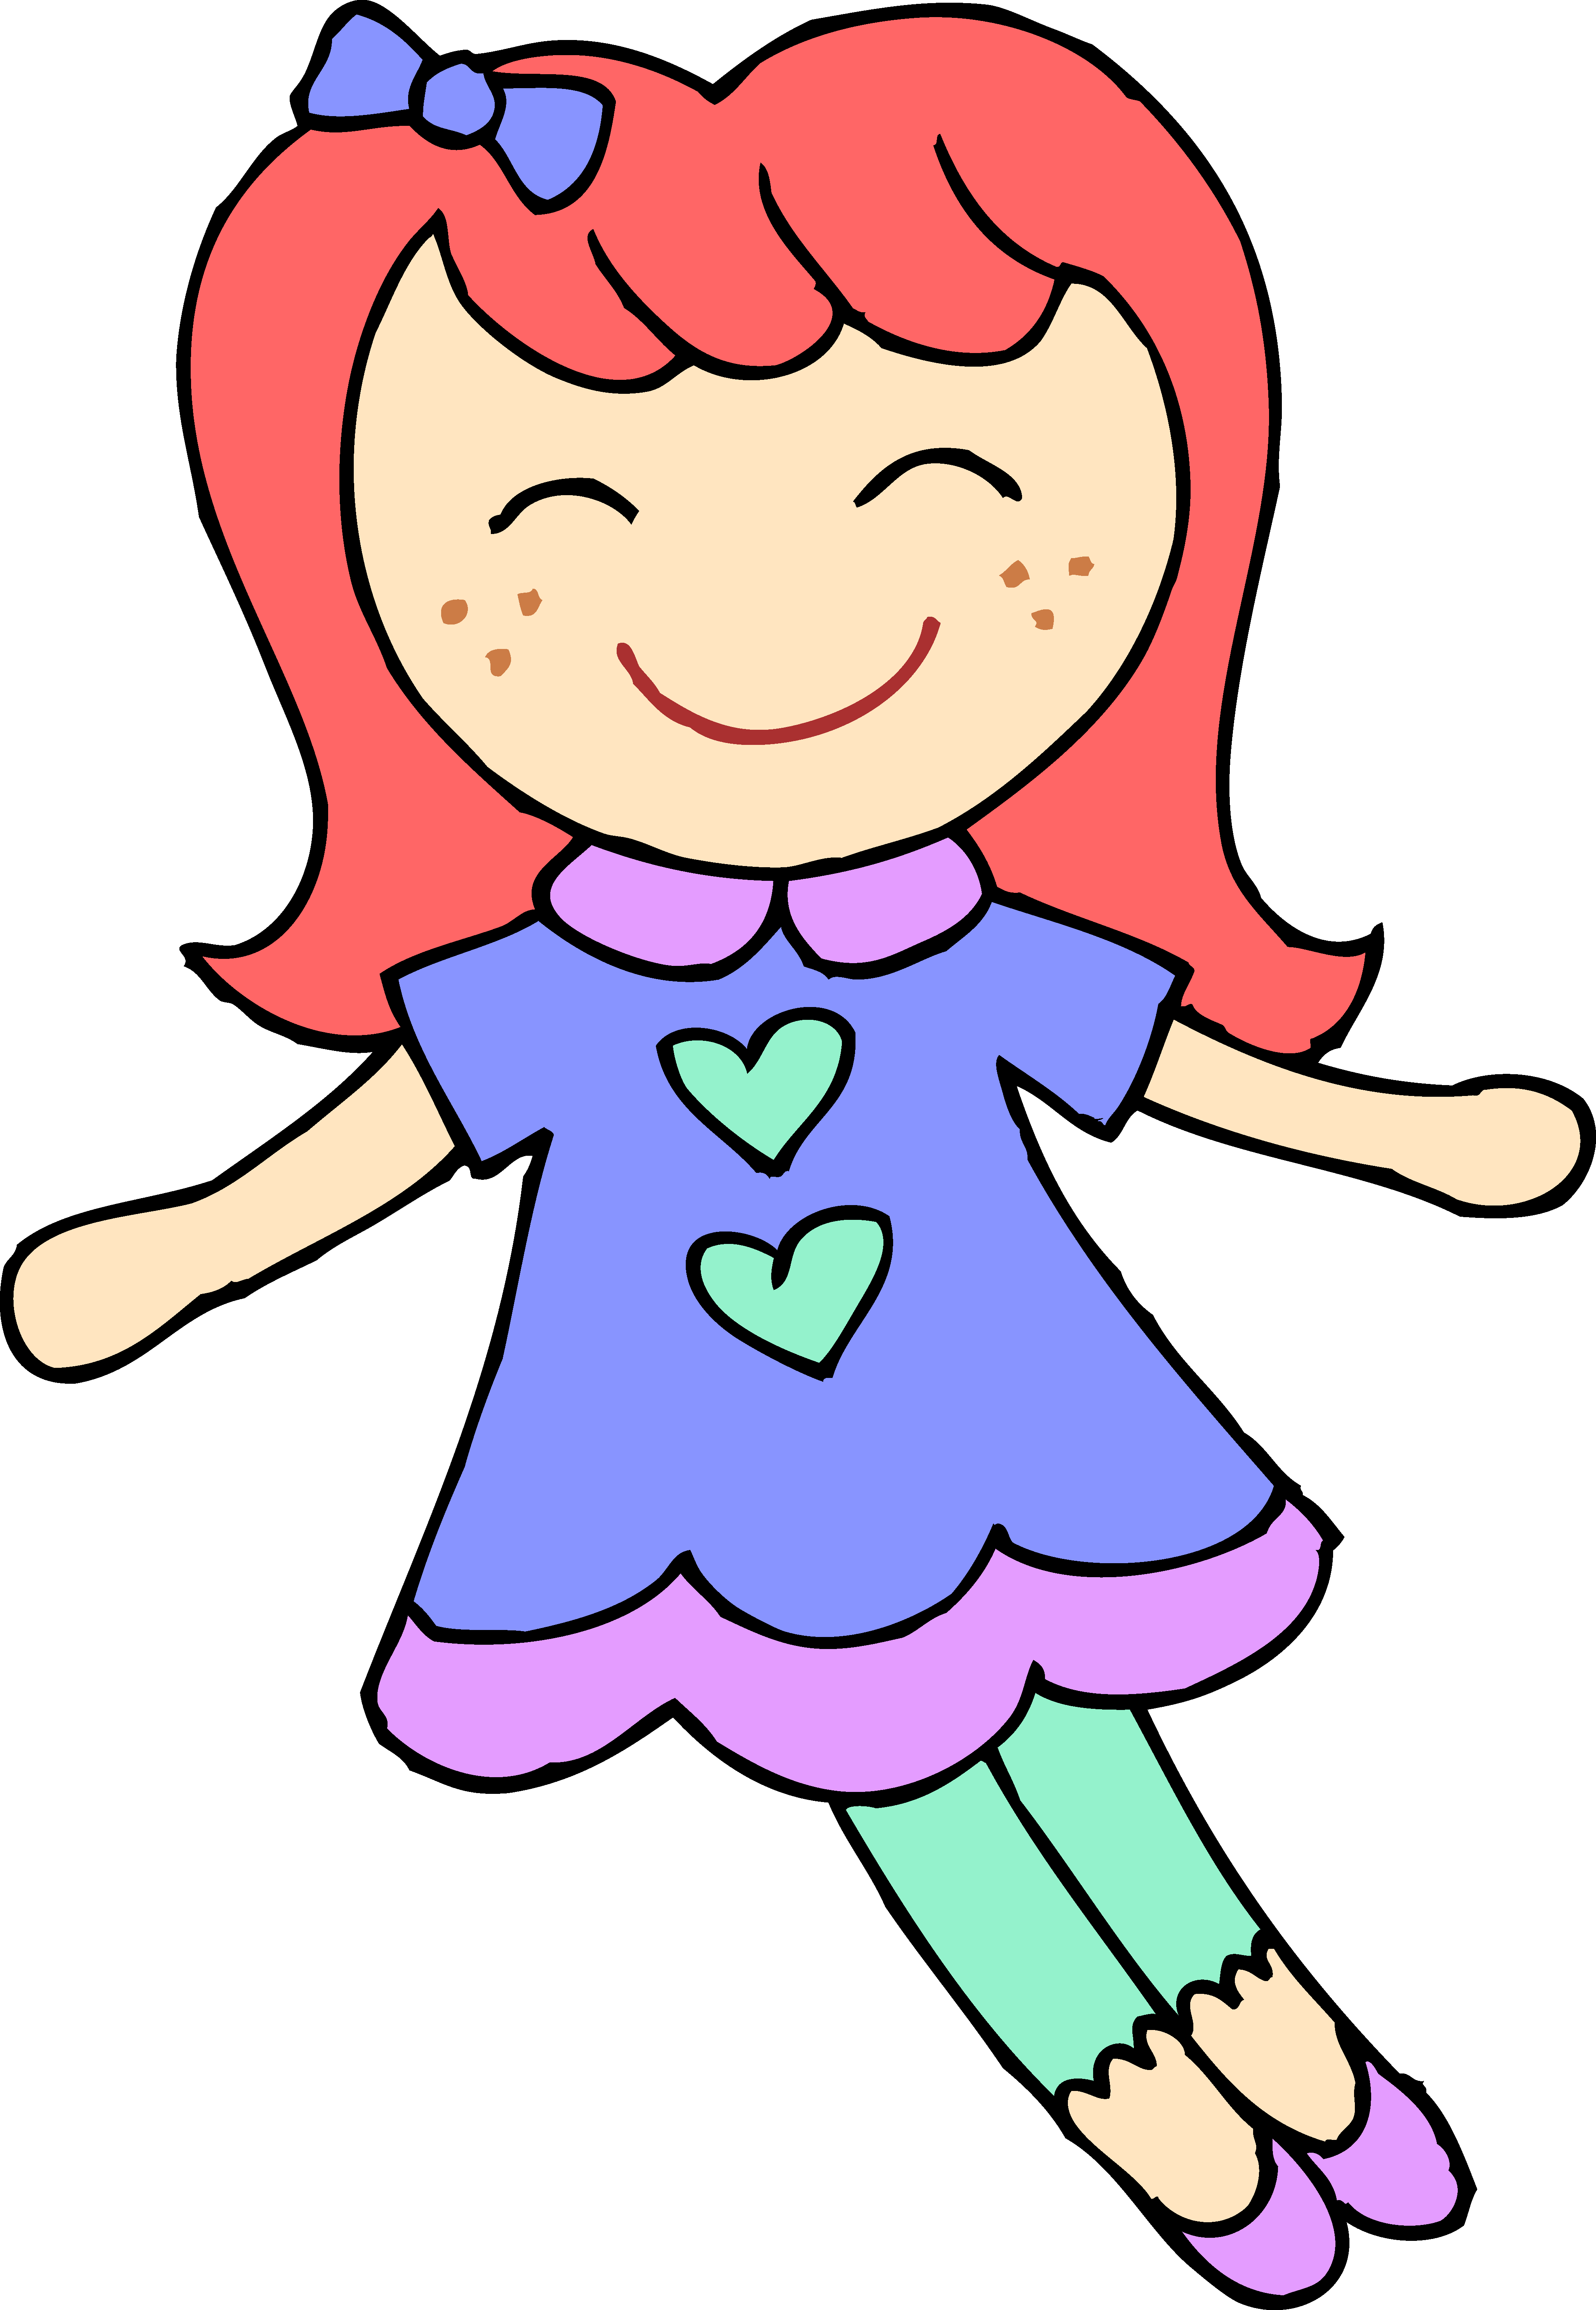 Clipart baby doll.